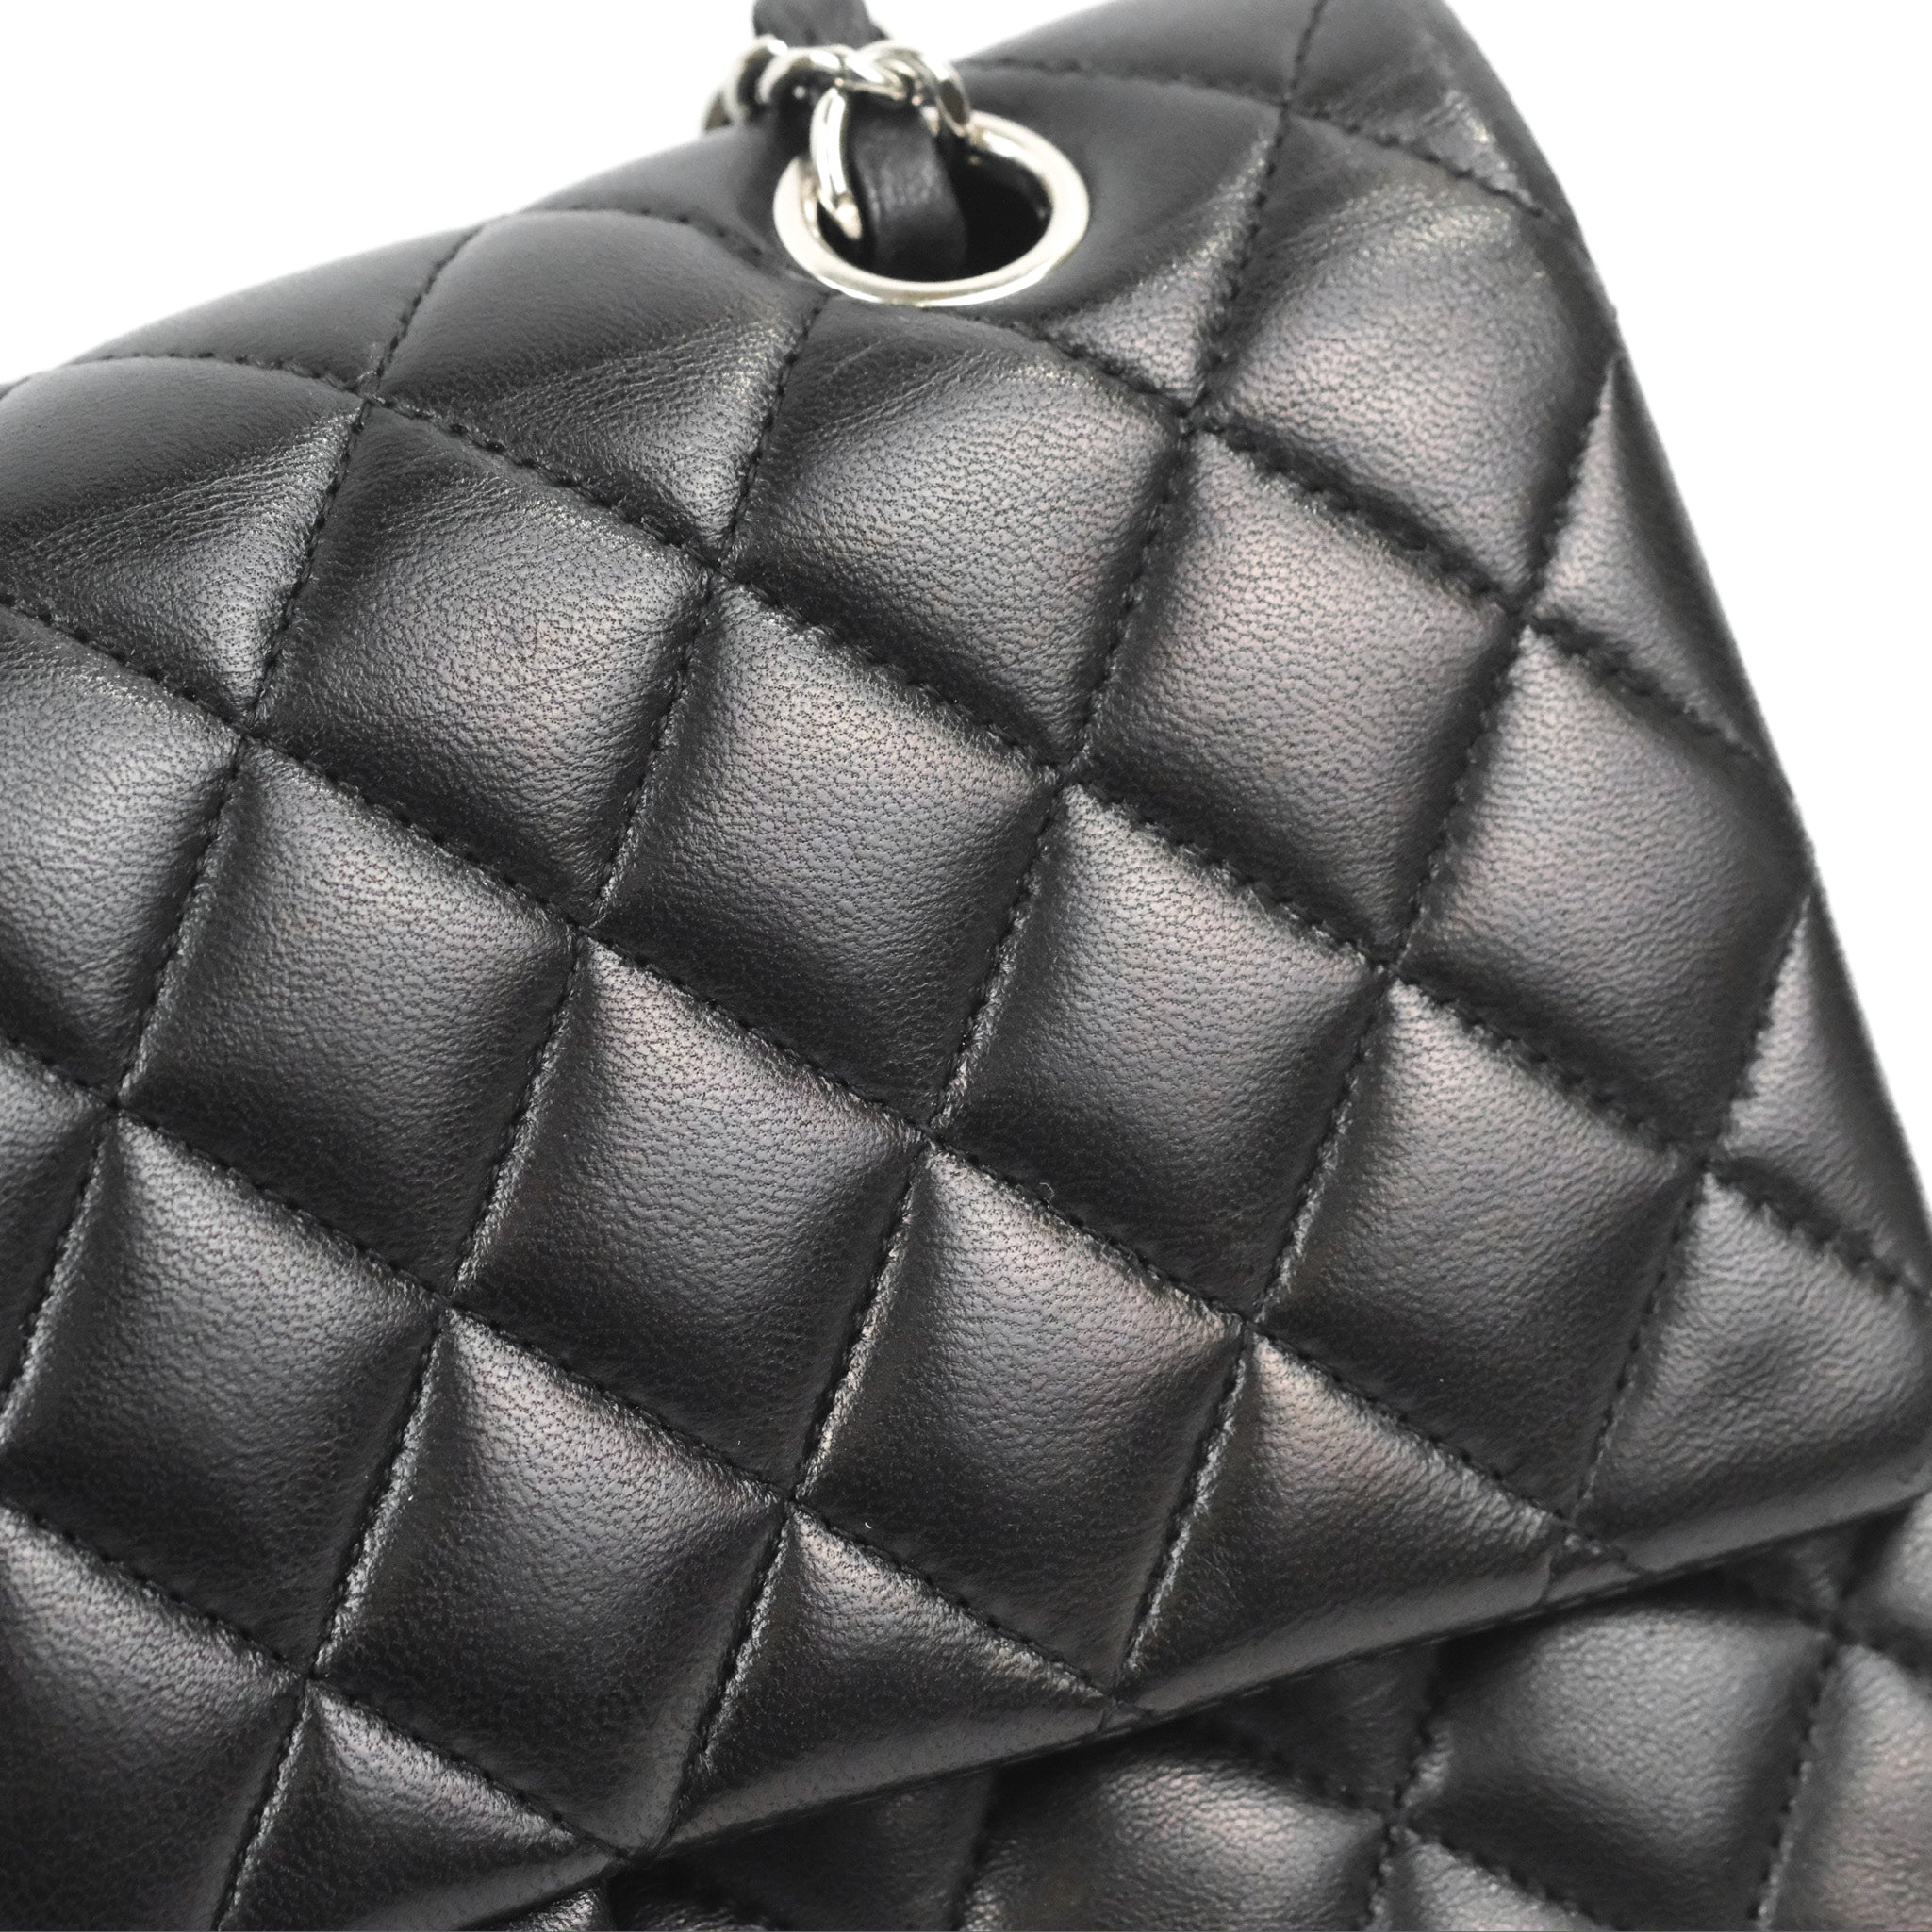 Black Quilted Lambskin Maxi Classic Double Flap Gold Hardware, 2015-2016